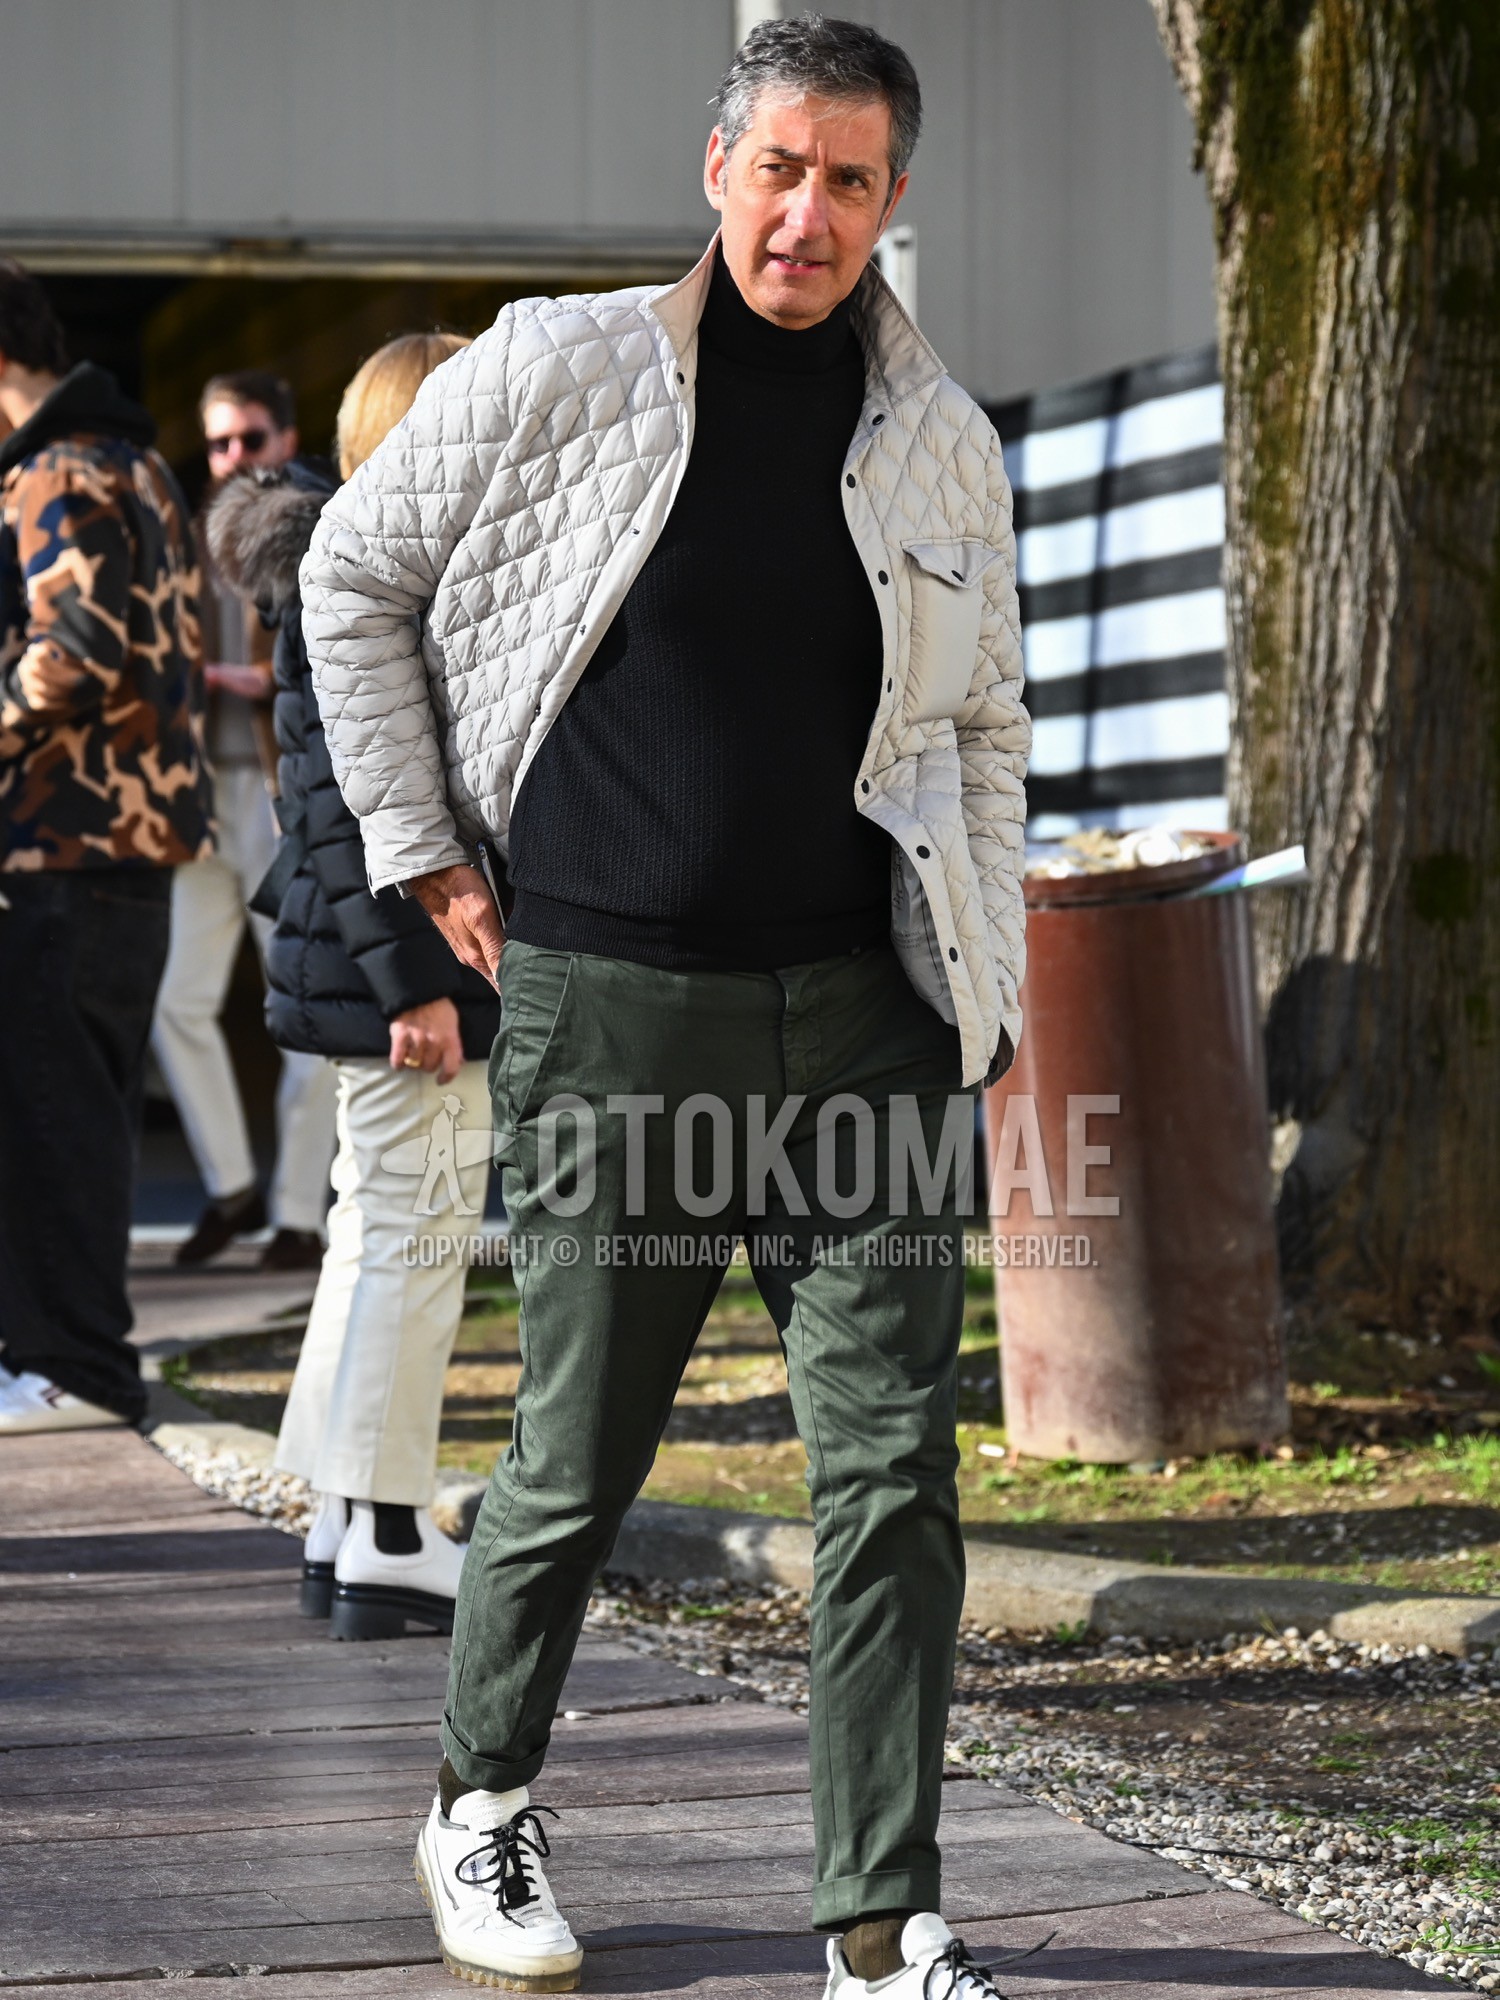 Men's spring autumn winter outfit with white plain quilted jacket, black plain turtleneck knit, green plain ankle pants, green plain chinos, olive green plain socks, white low-cut sneakers.